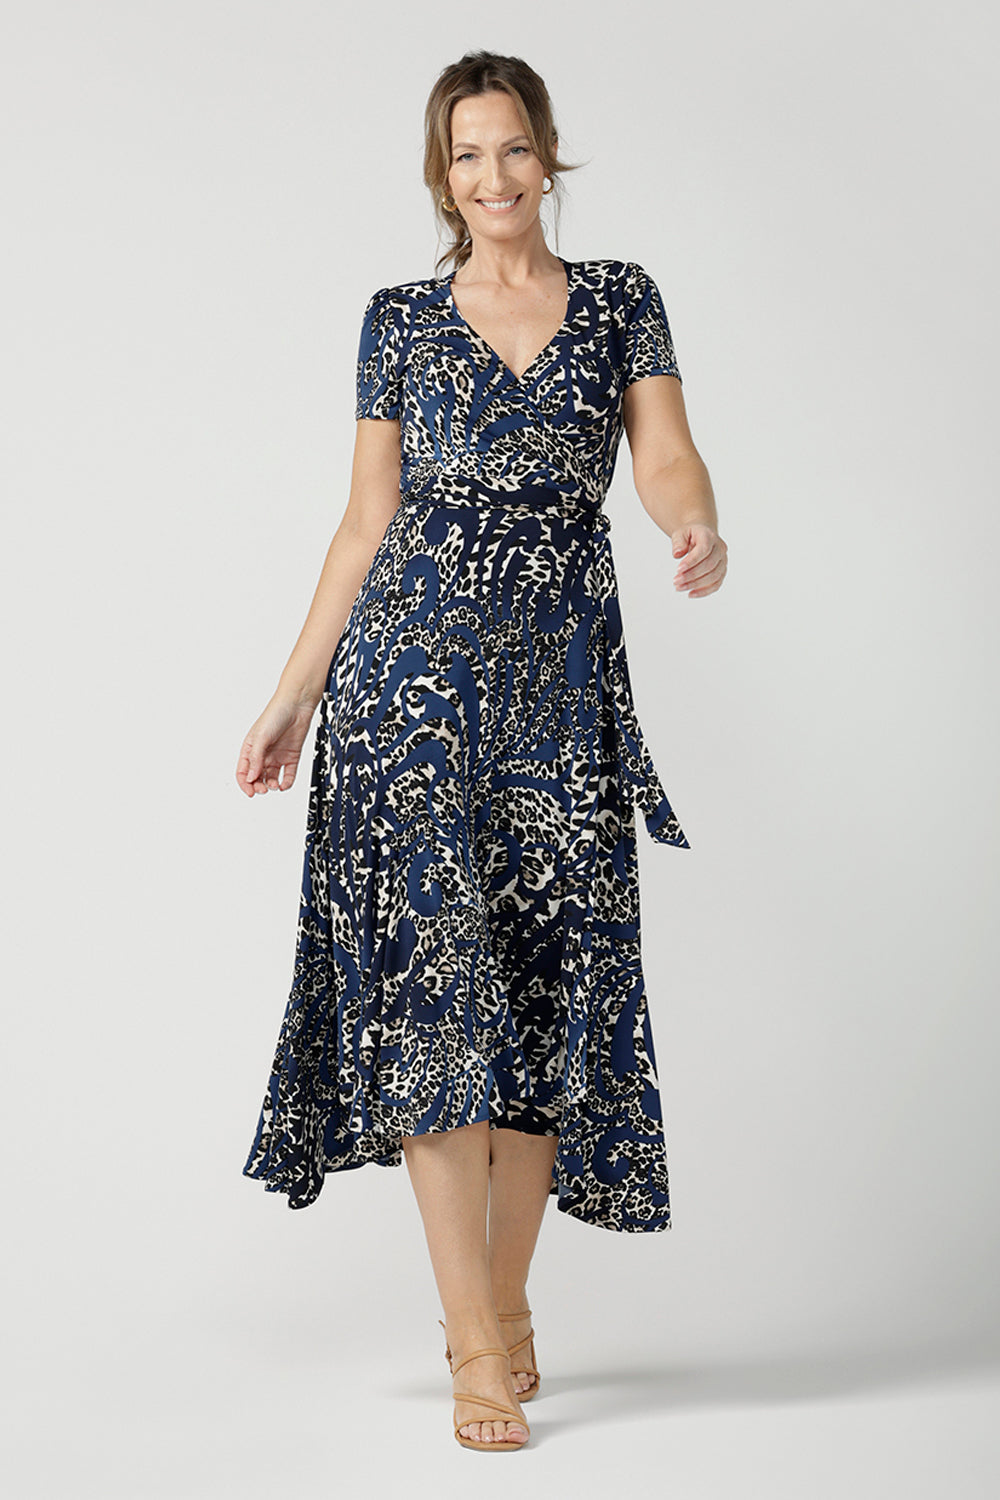 A size 10 over 40 year old woman wears a animal print jersey wrap dress with tailored godets in the skirt. A good wrap dress for summer, shop Australian-made plus size wrap dresses online at Australian fashion brand Leina & Fleur.